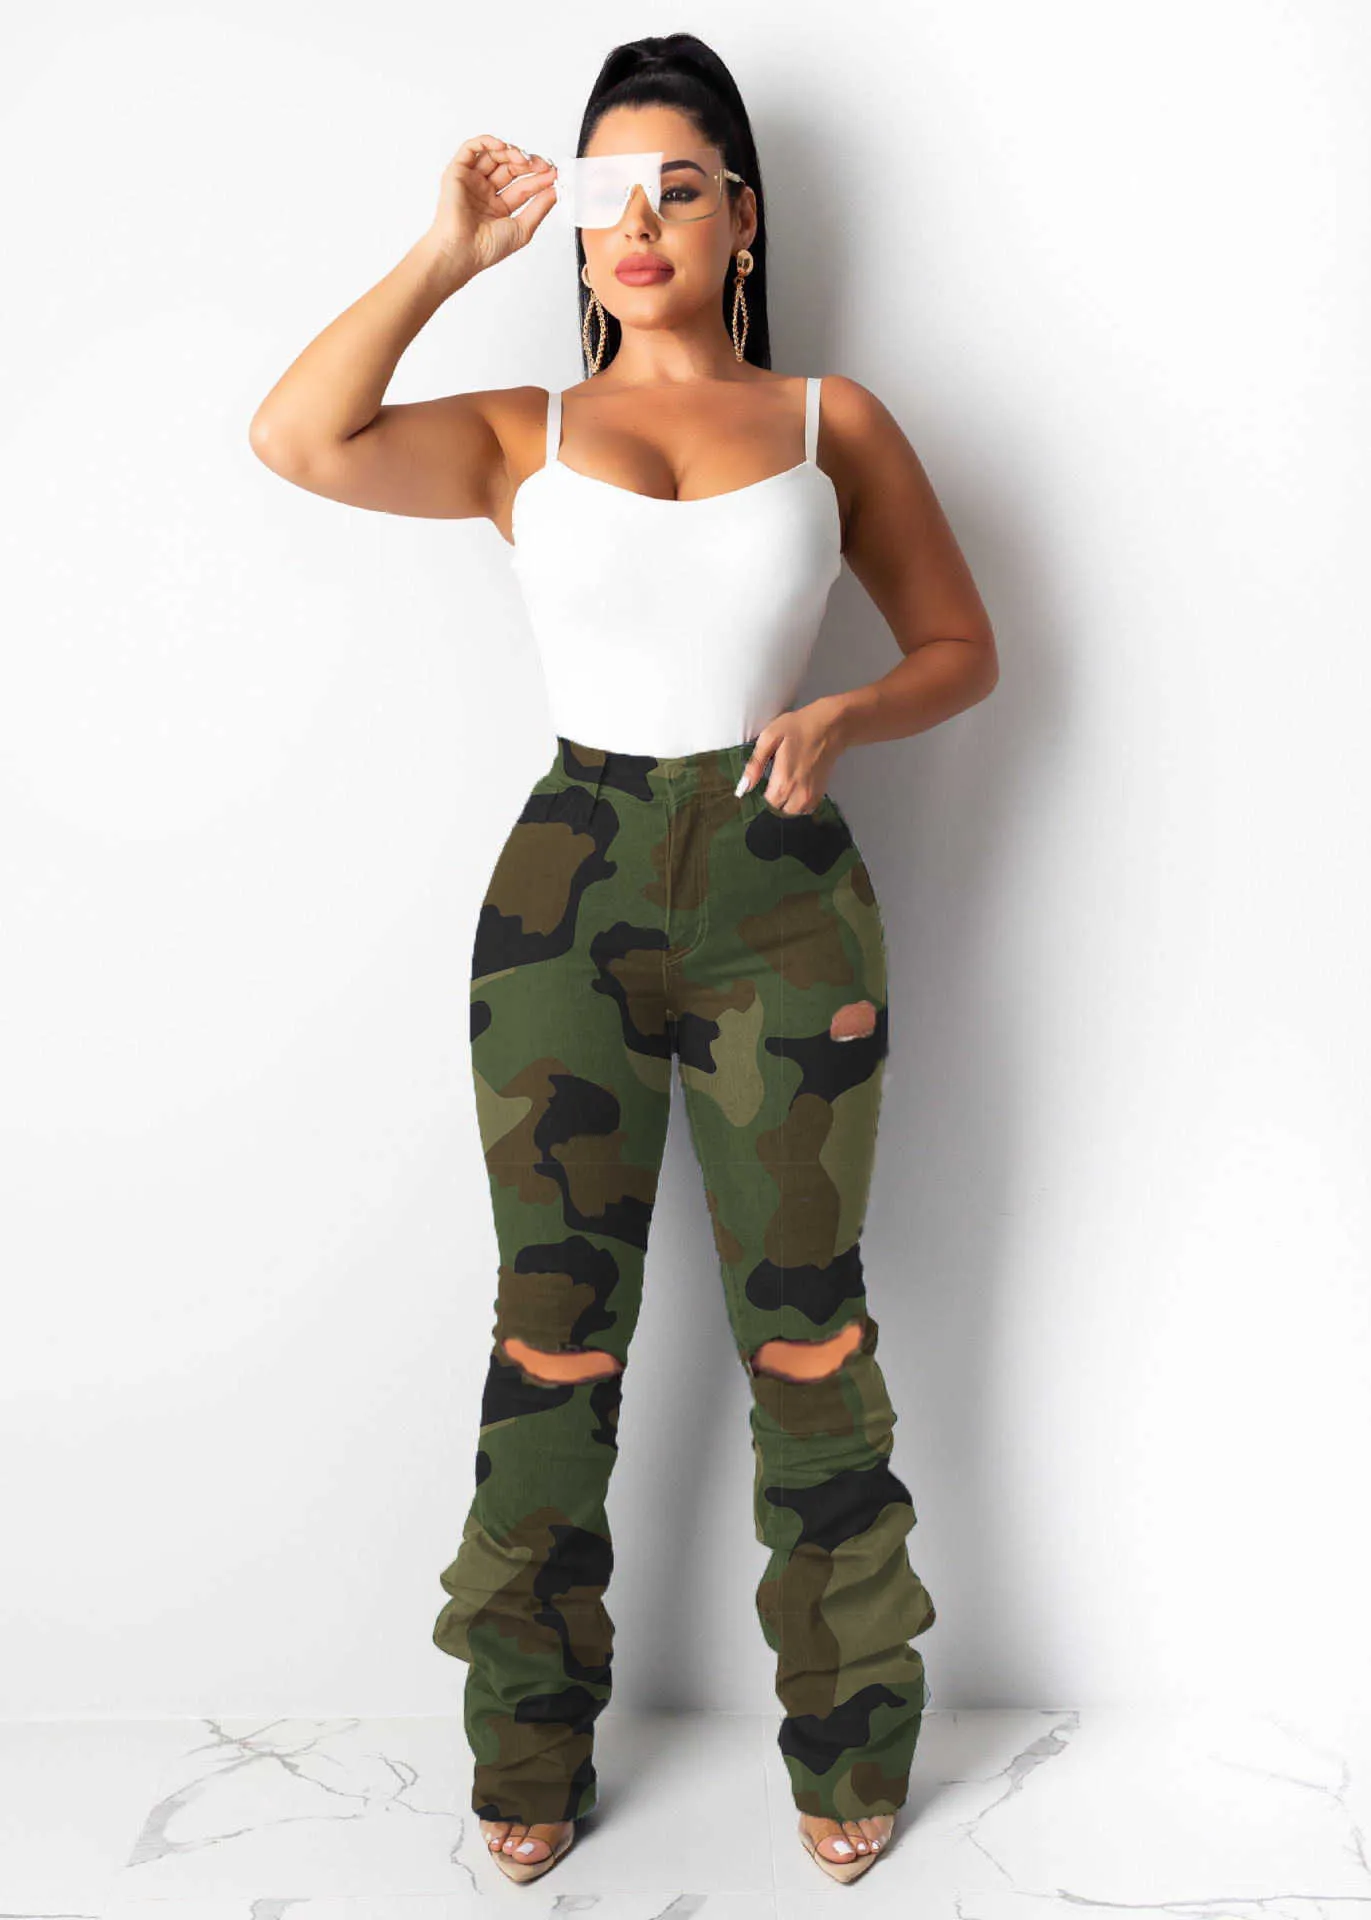 Sale Streetwear Women High Waist Hole Stacked Pants for Casual Skinny Green Camouflage Trouses Plus Size Broeken Dames 210604